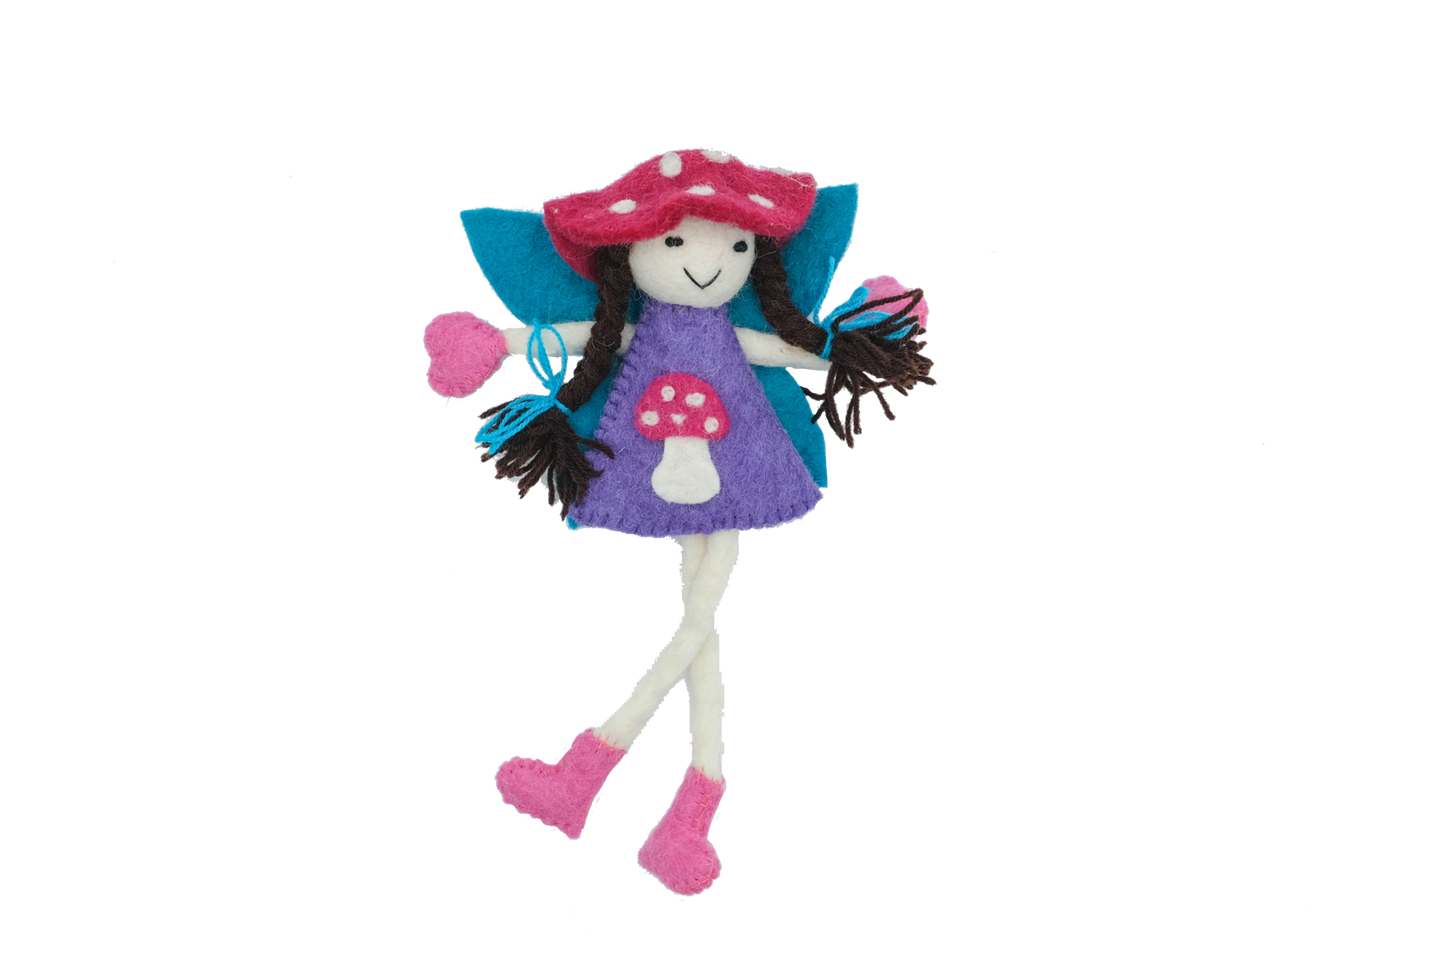 This Global Groove Life, handmade, ethical, fair trade, eco-friendly, sustainable, purple and turquoise, mushroom bonnet fairy ,was created by artisans in Kathmandu Nepal and is adorned with an adorable hot pink mushroom motif.